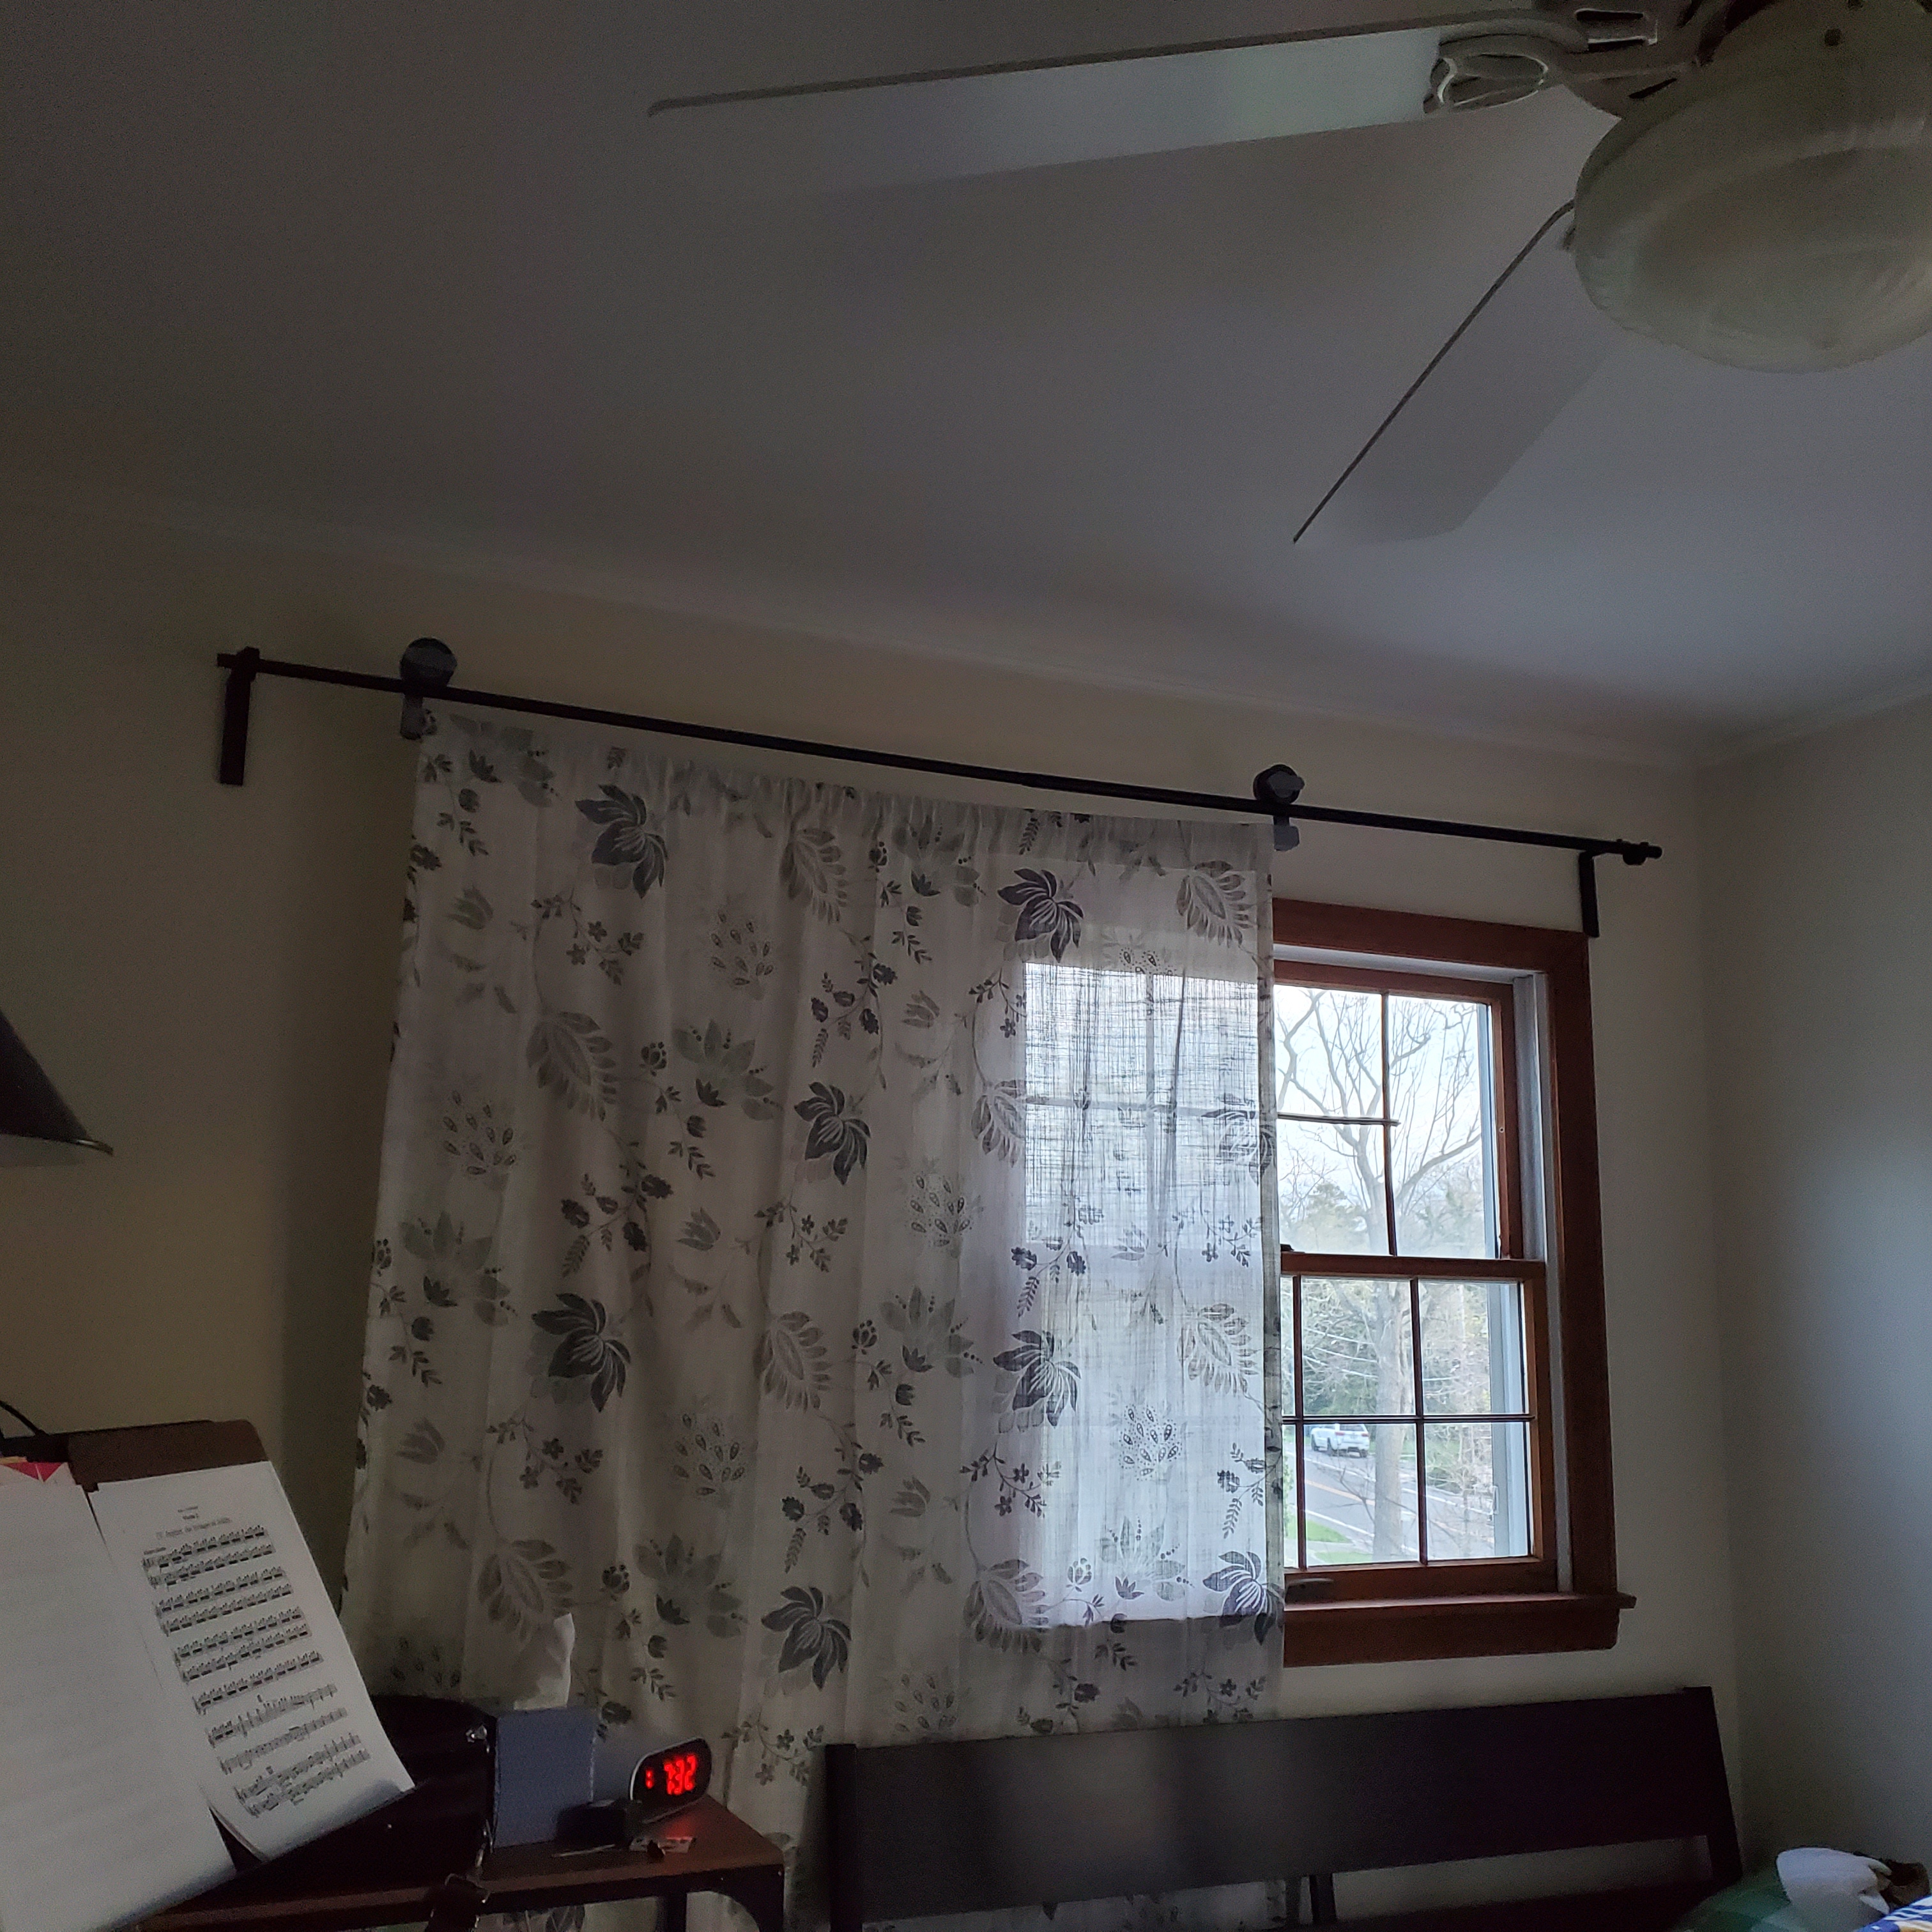 The curtain mounted on a curtain rod